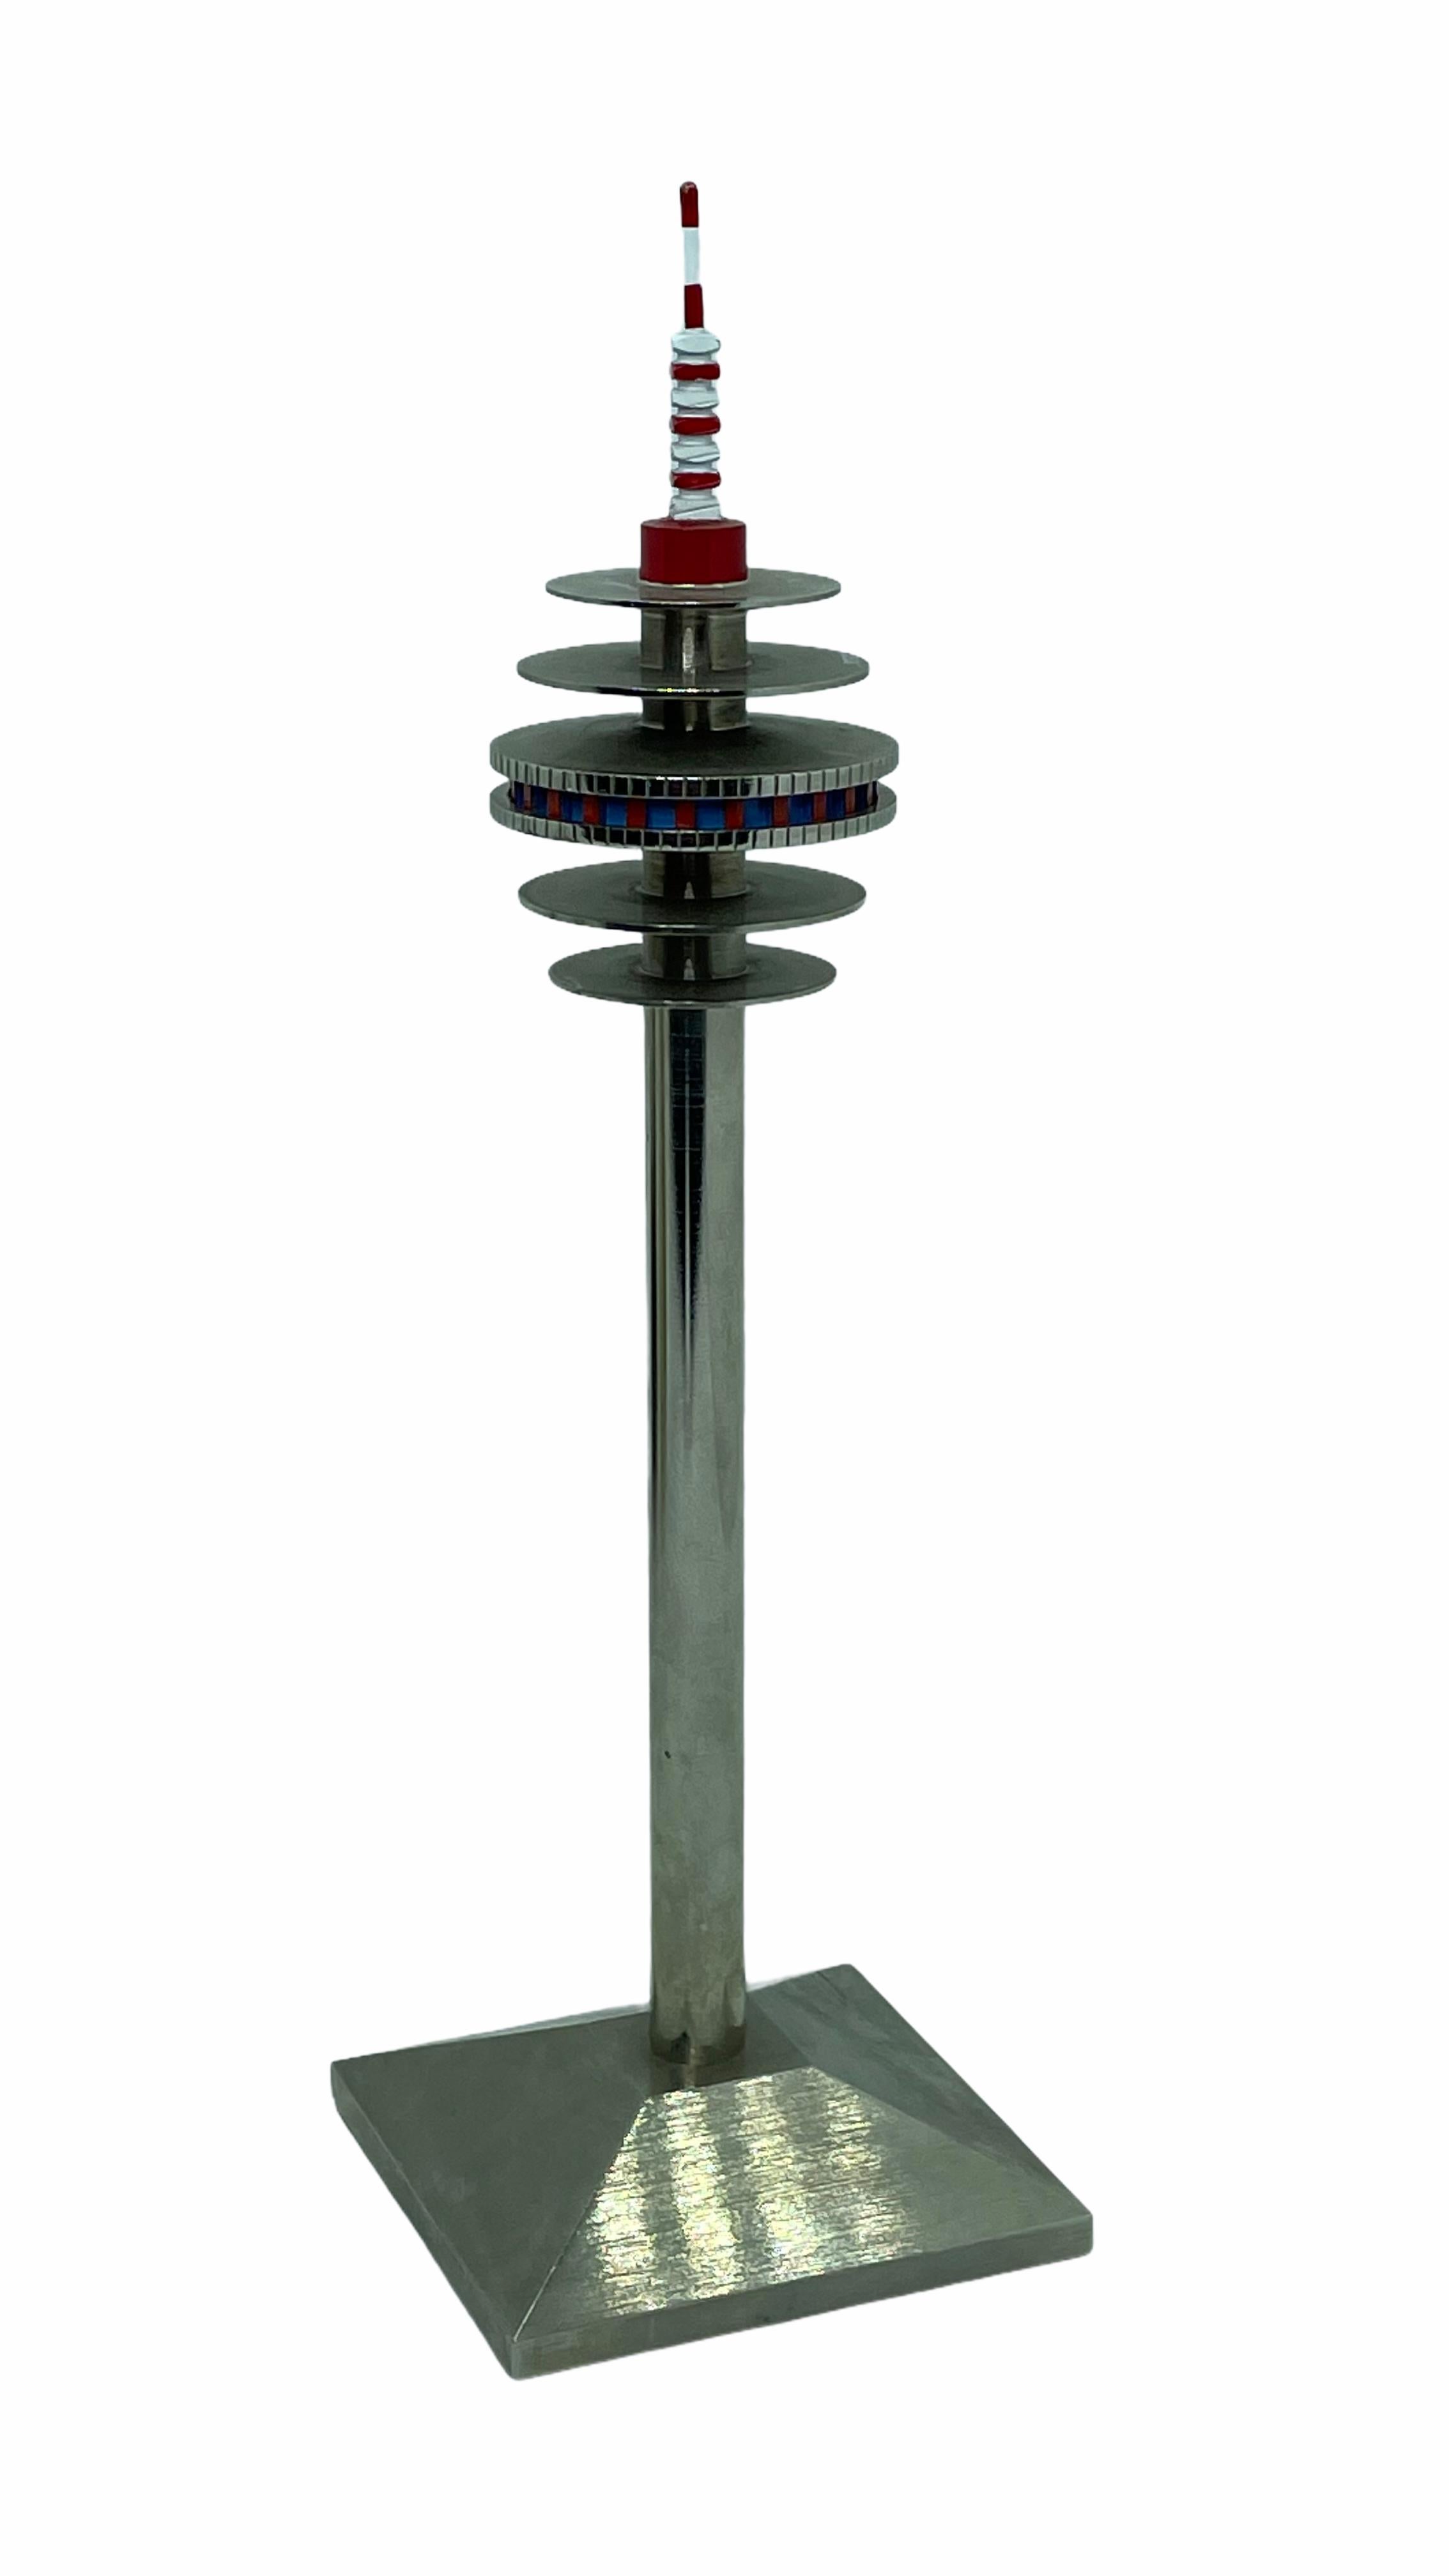 Scaled model a television tower from Vienna, Austria. Hand-spun in metal. A nice architectural sculpture for every living room or desktop. It measures approximate 7 3/8